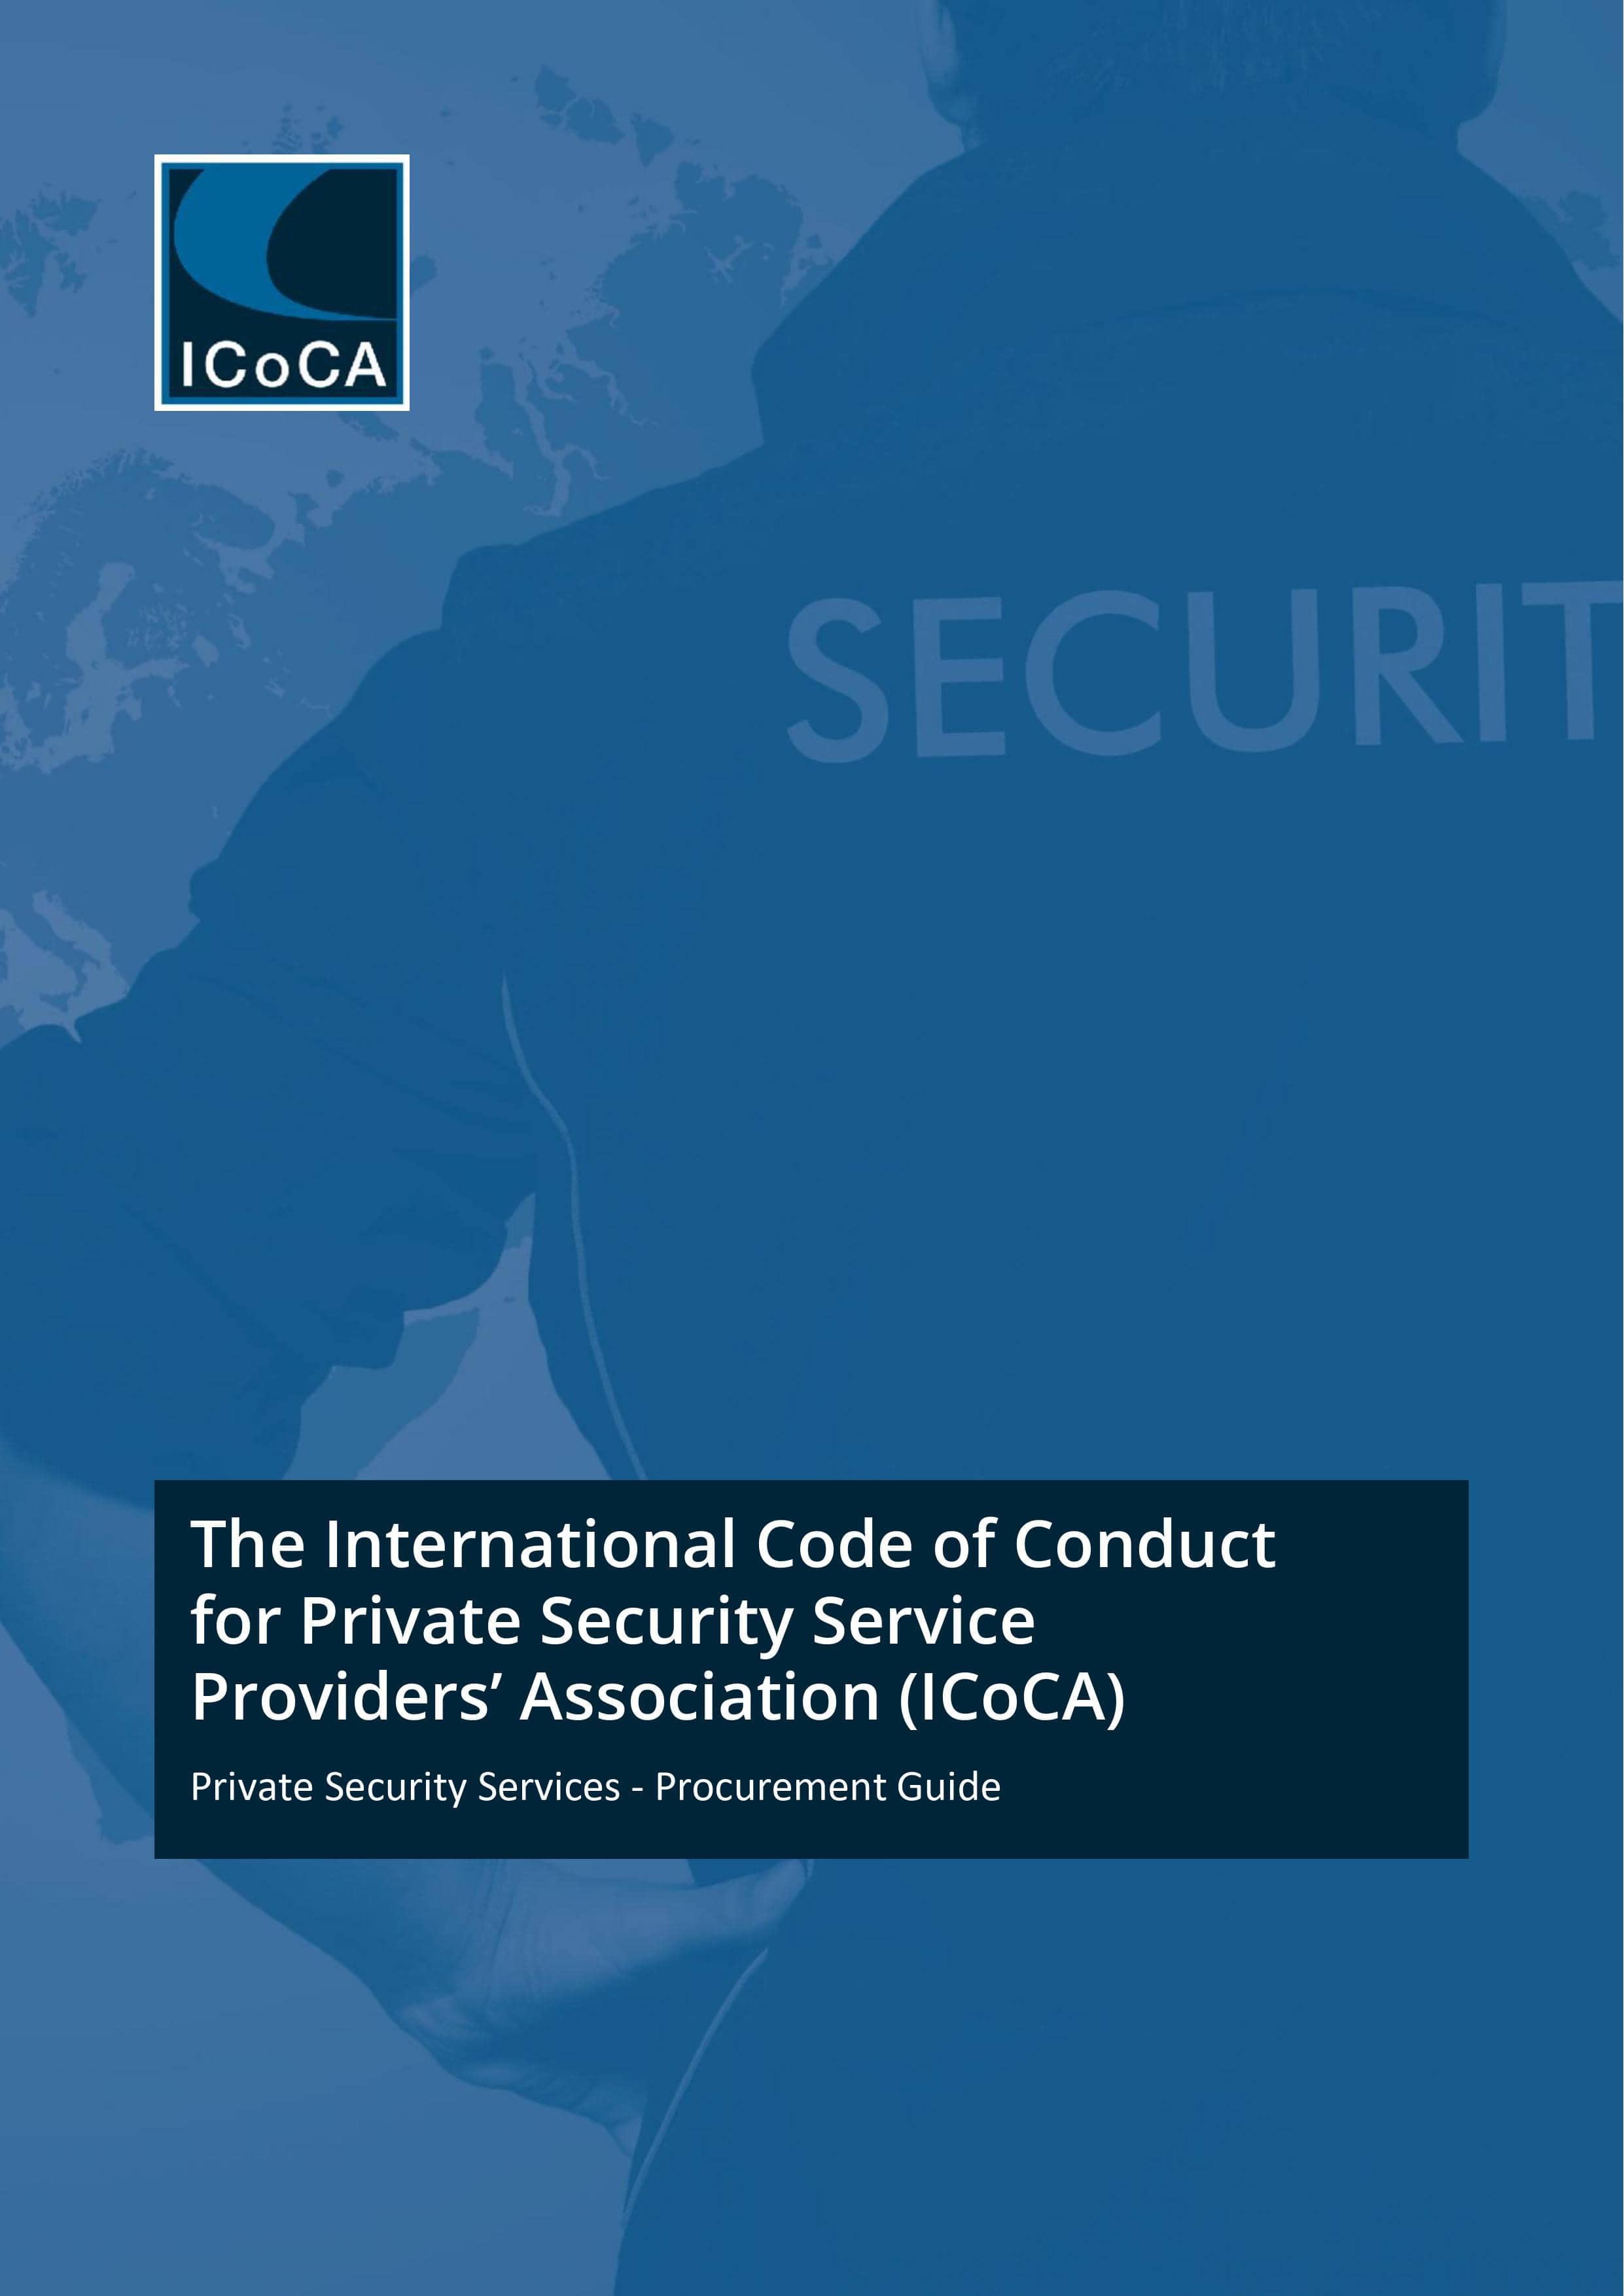 ICoCA Procurement Guide for Contracting Responsible Private Security Providers